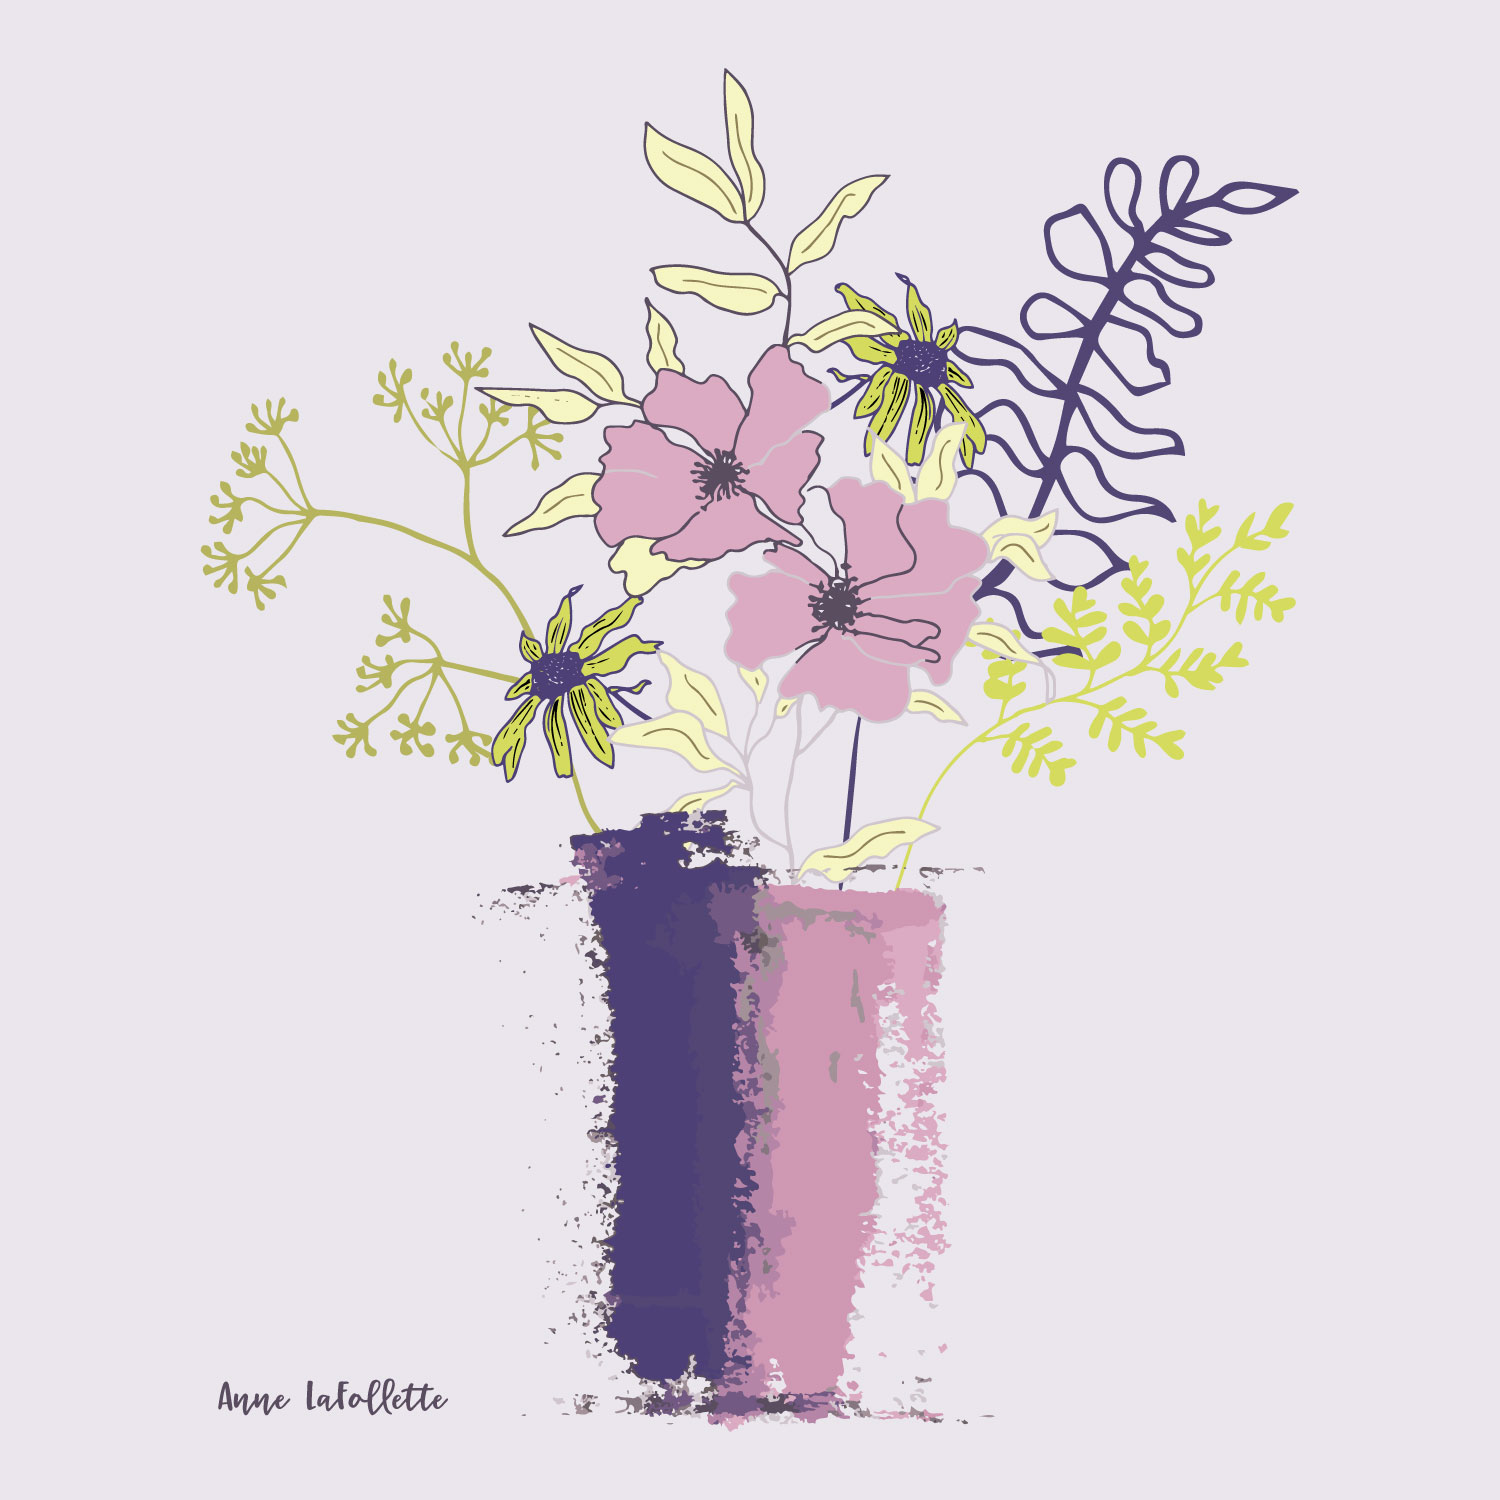 New-bouquet-in-pinks-purples-lime-greens.jpg